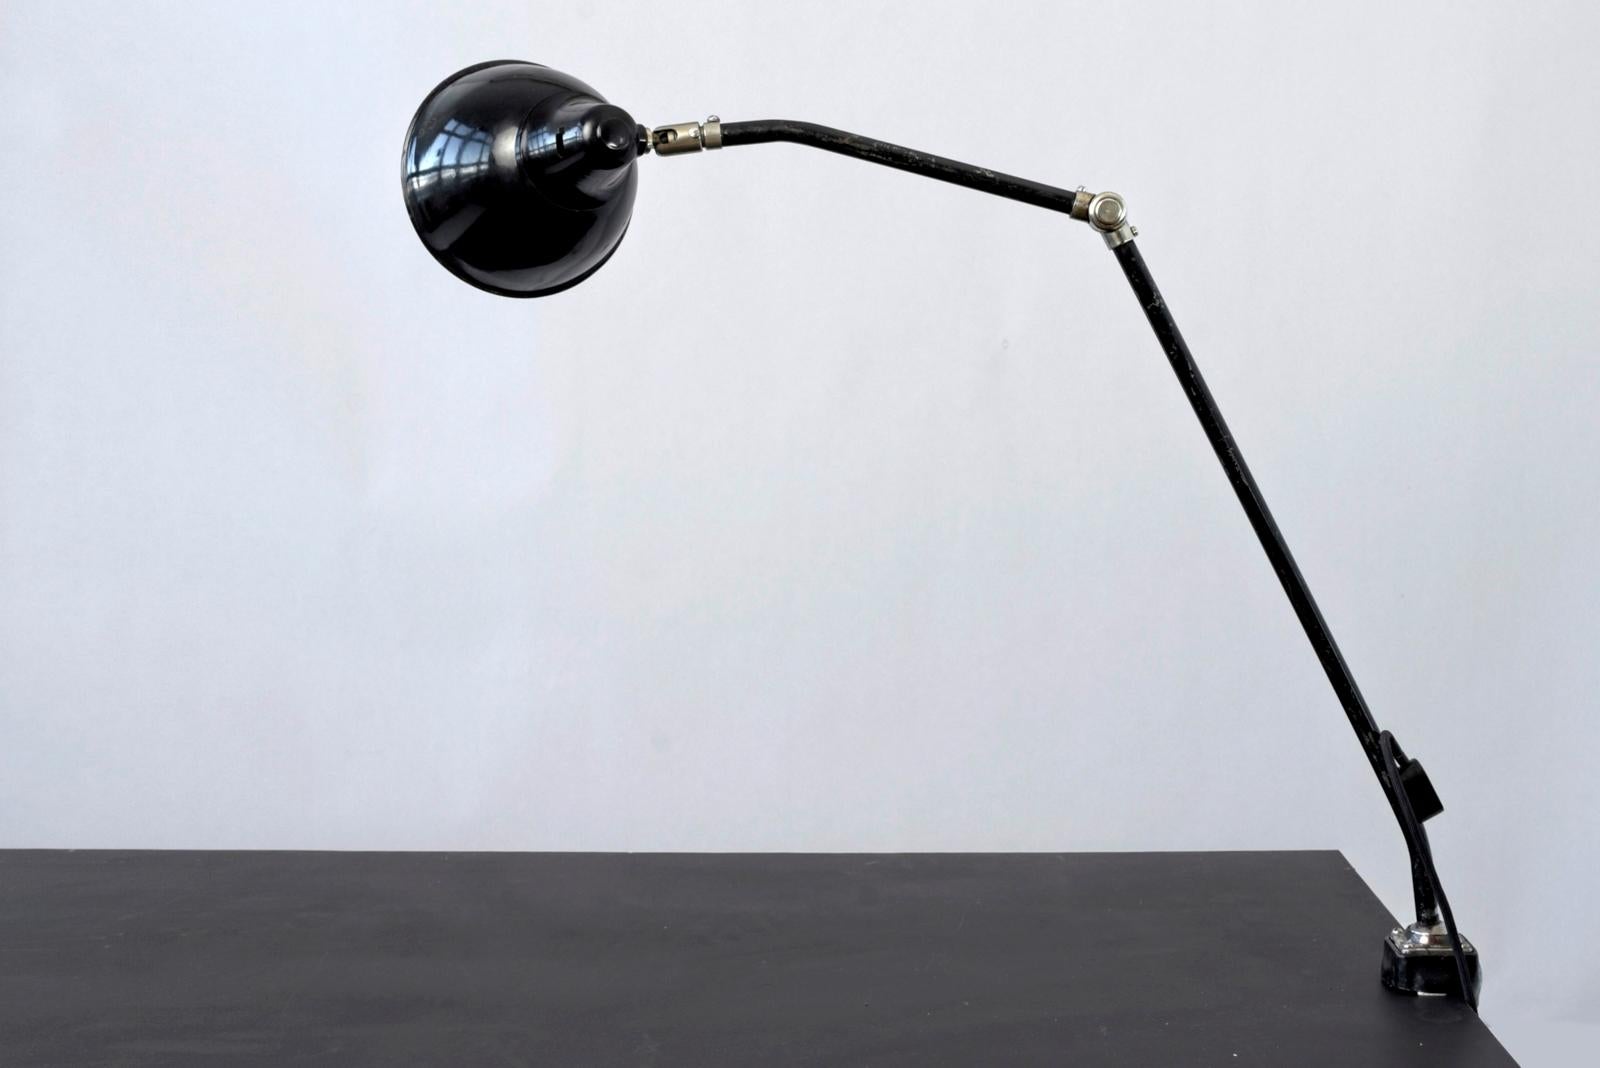 Mid-20th Century Table Lamp by AEG Berlin, Germany - 1930 For Sale